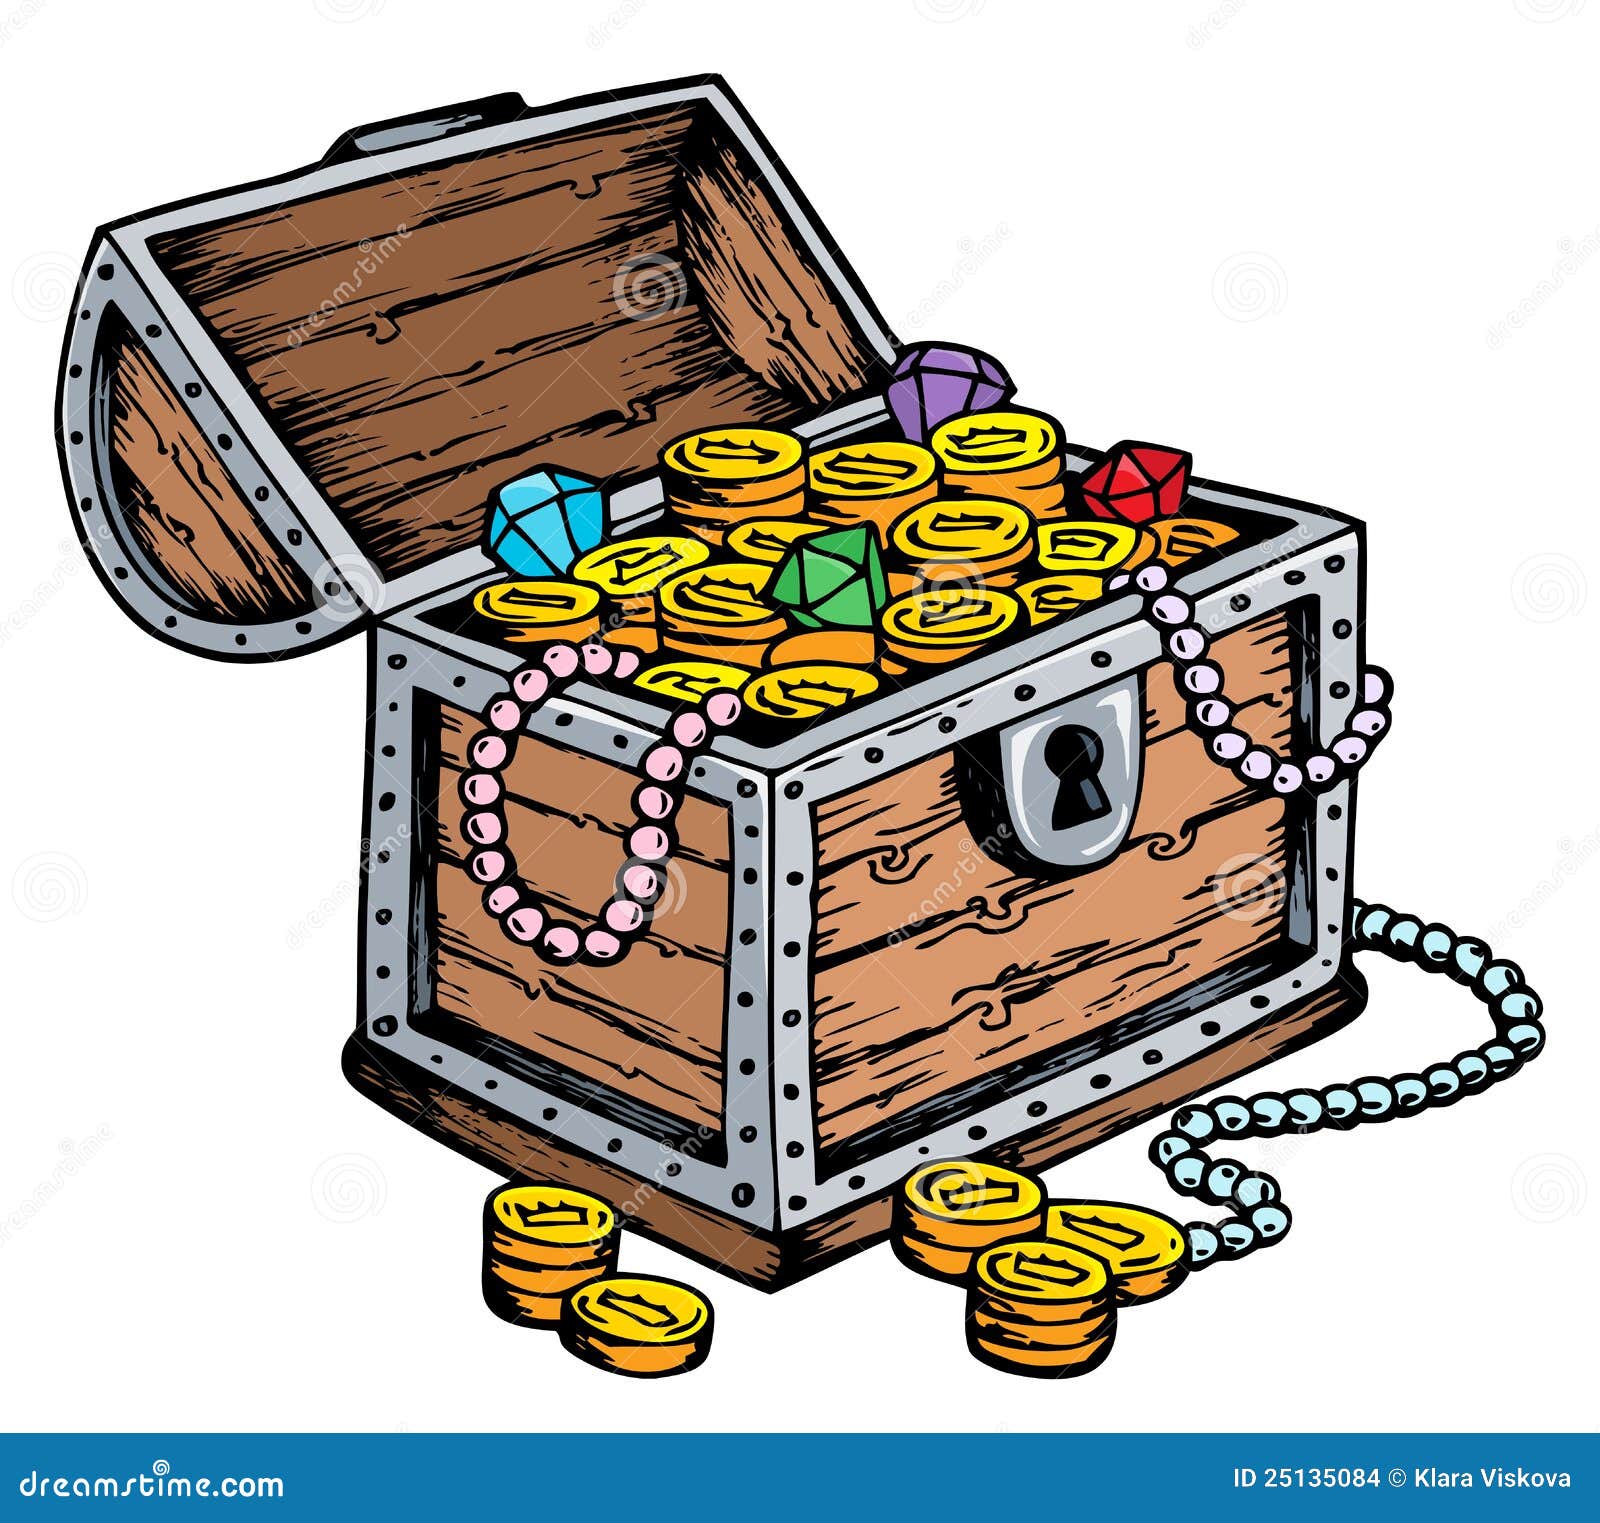 Treasure Chest Drawing Stock Images - Image: 25135084